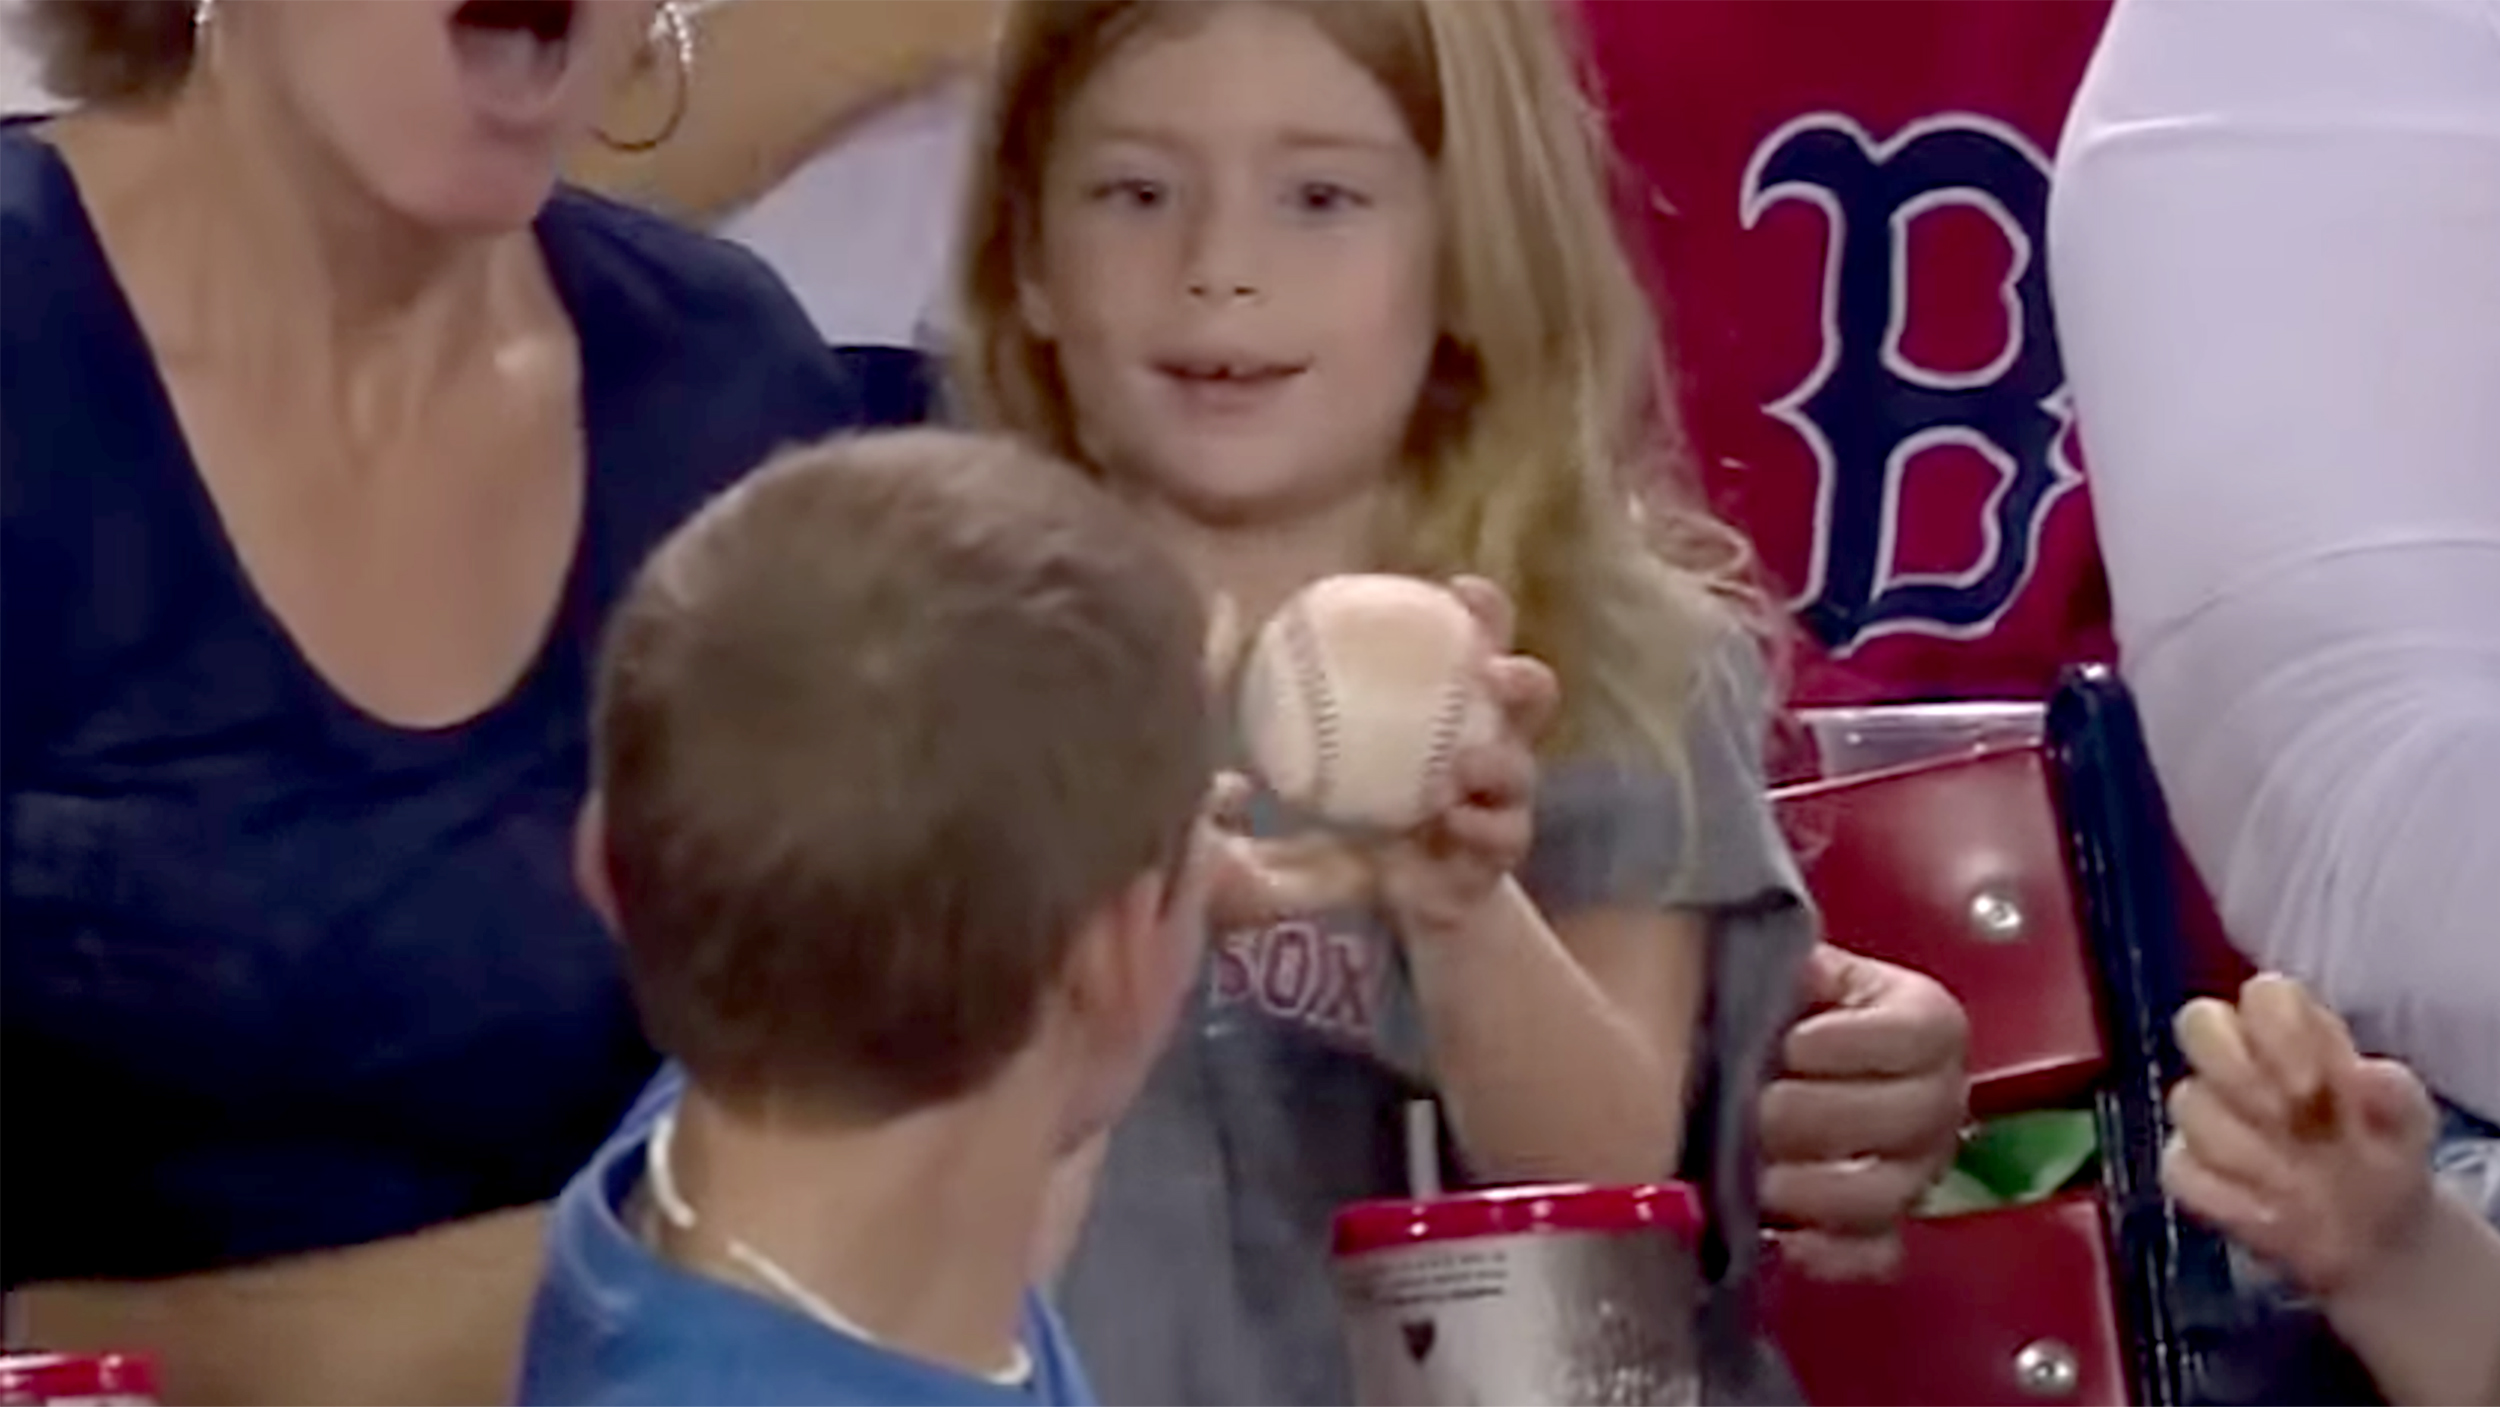 Red Sox fan, 12, gives foul ball to little girl: 'It's good to